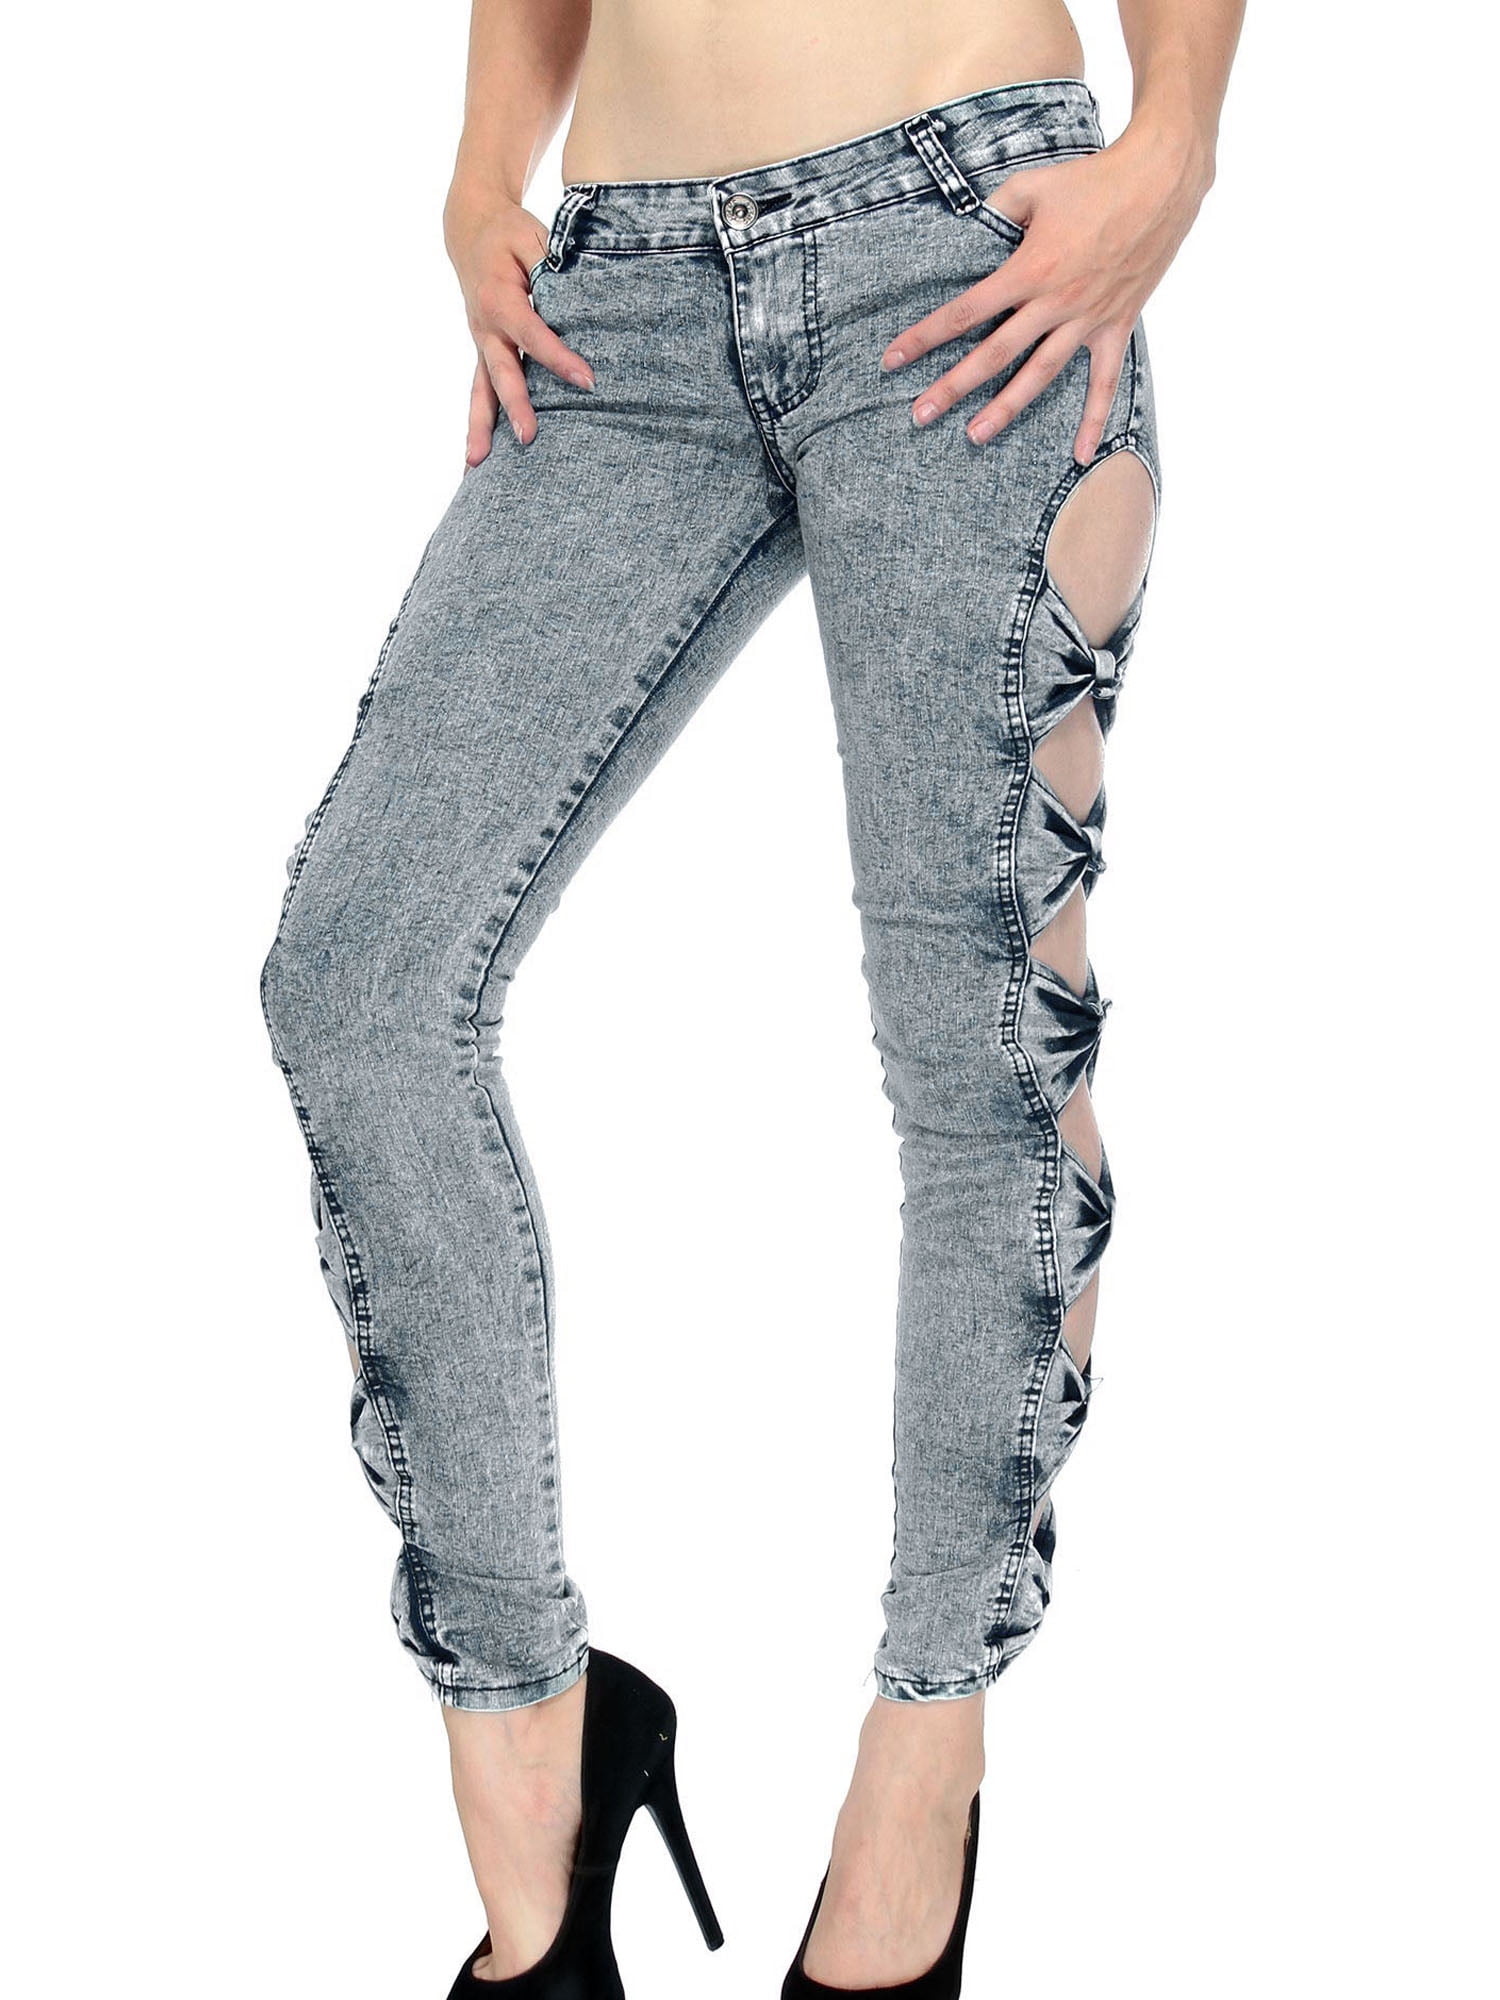 Women Stretch Tight Bow-Knot Ripped Slim Fit Skinny Denim Jeans Pants Trousers